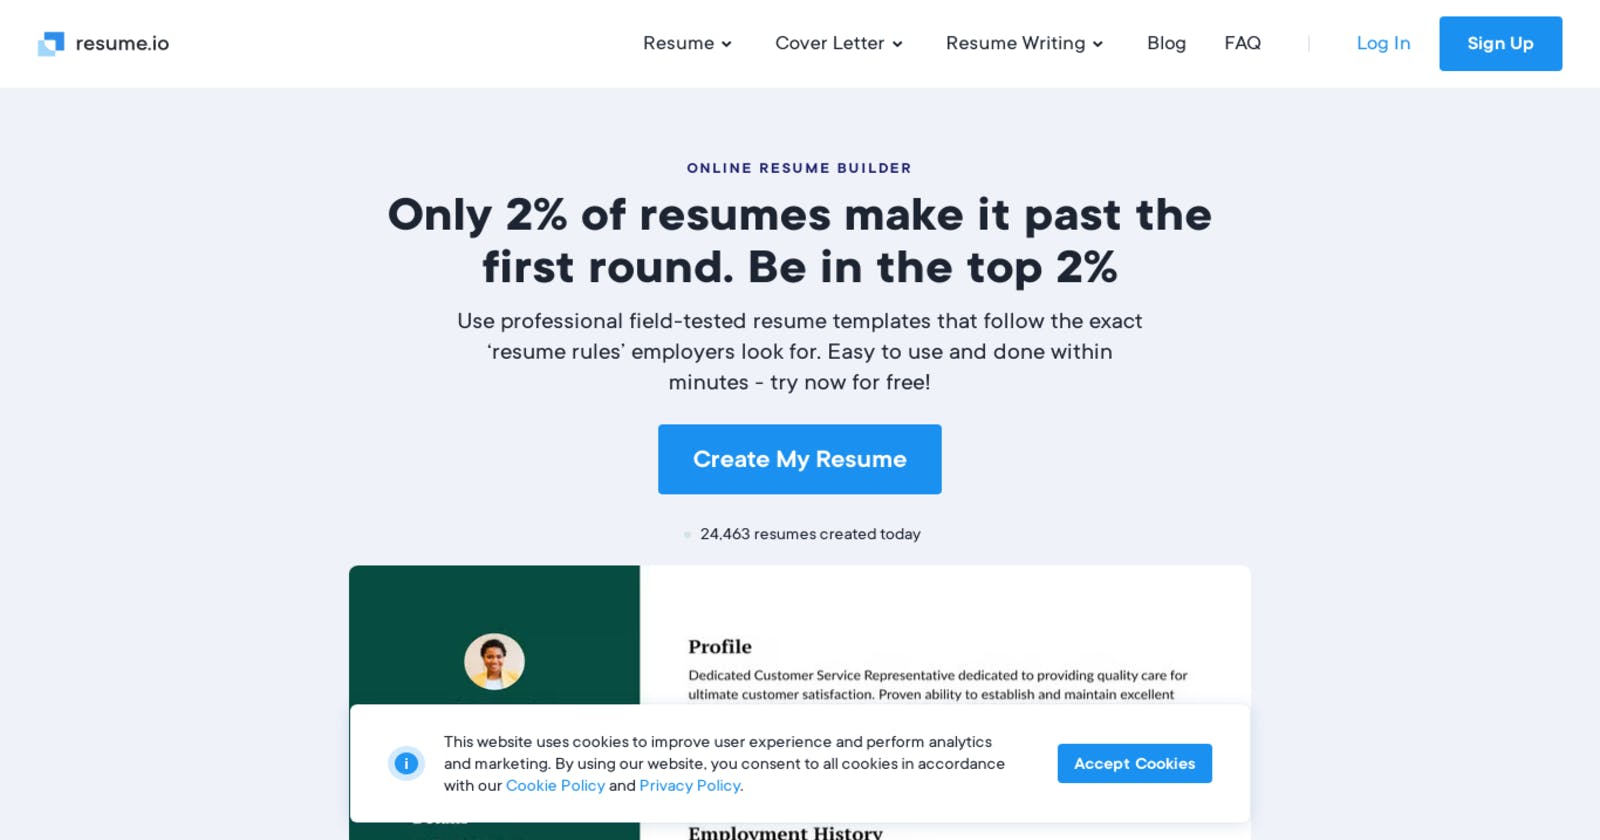 Resume.io: A Guide to Crafting Your Winning Resume